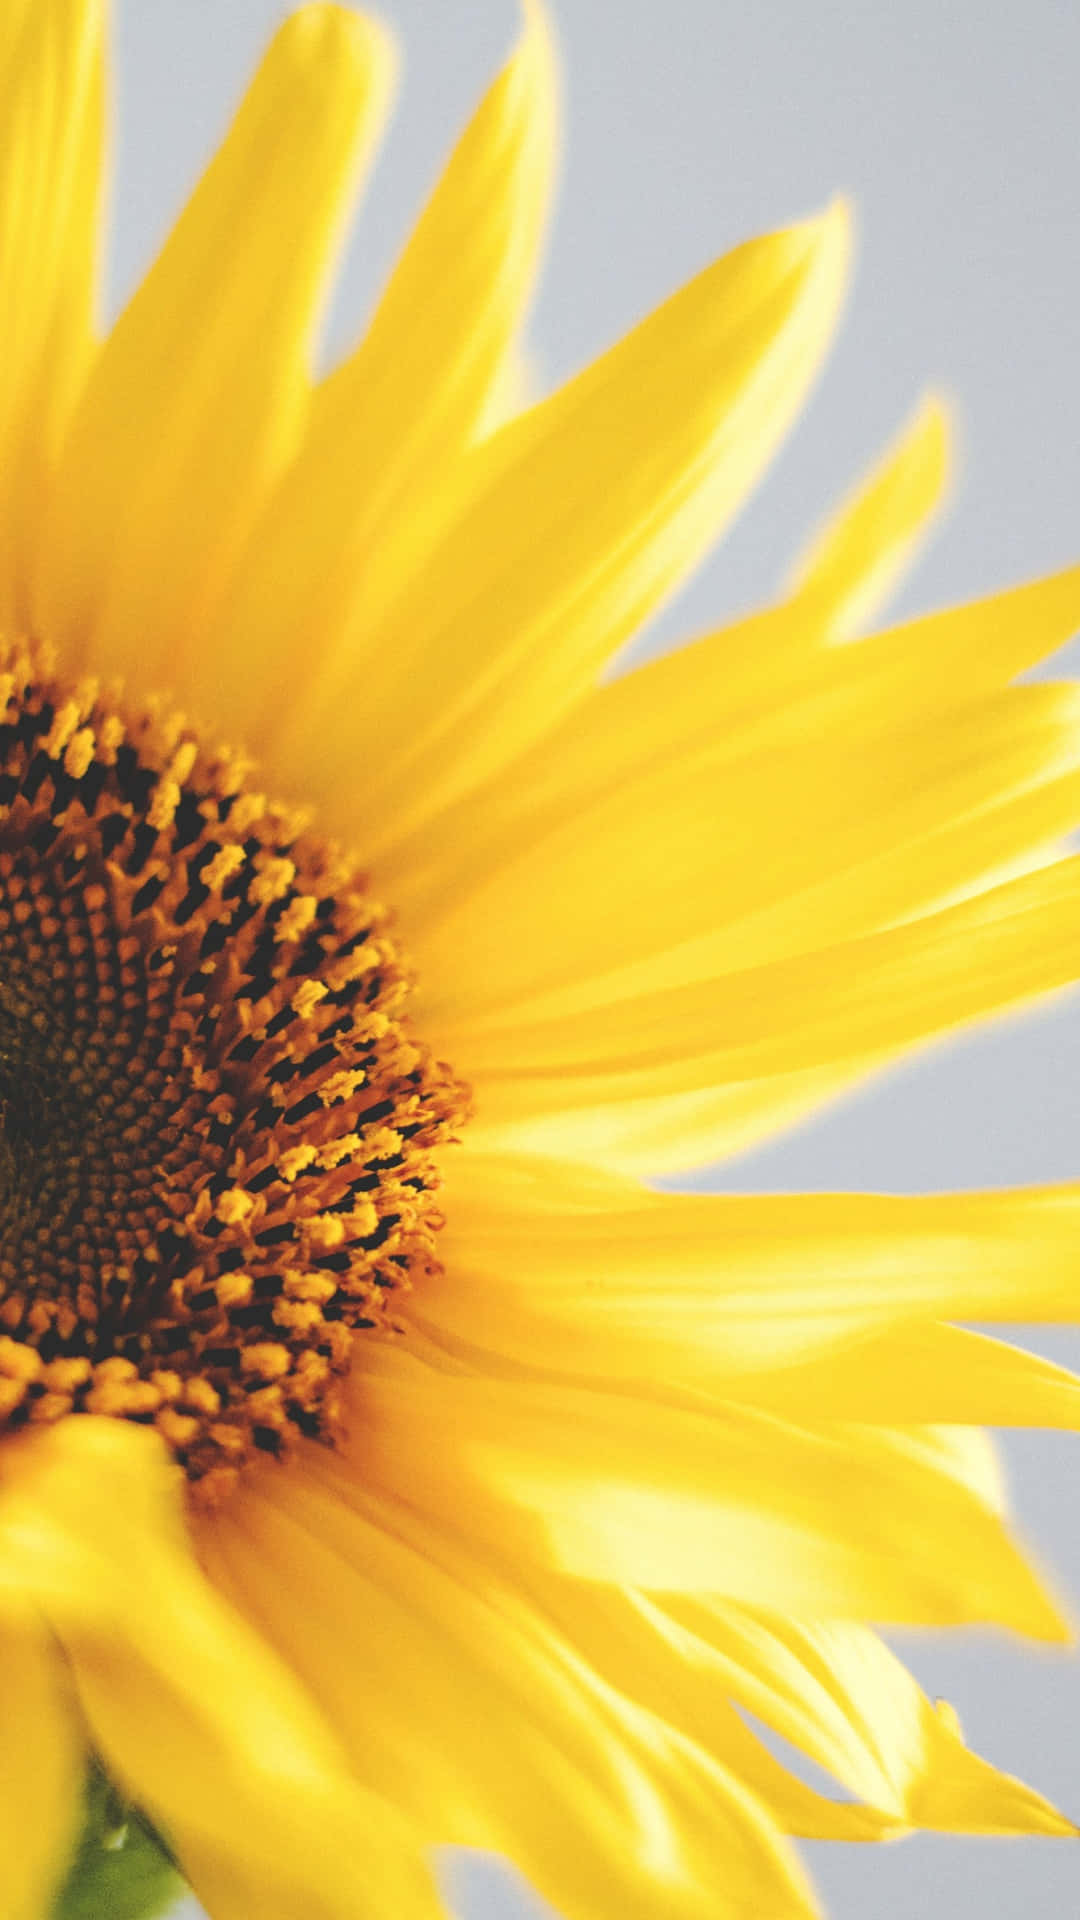 Bright and Beautiful Sunflower Against Sky Blue Background Wallpaper